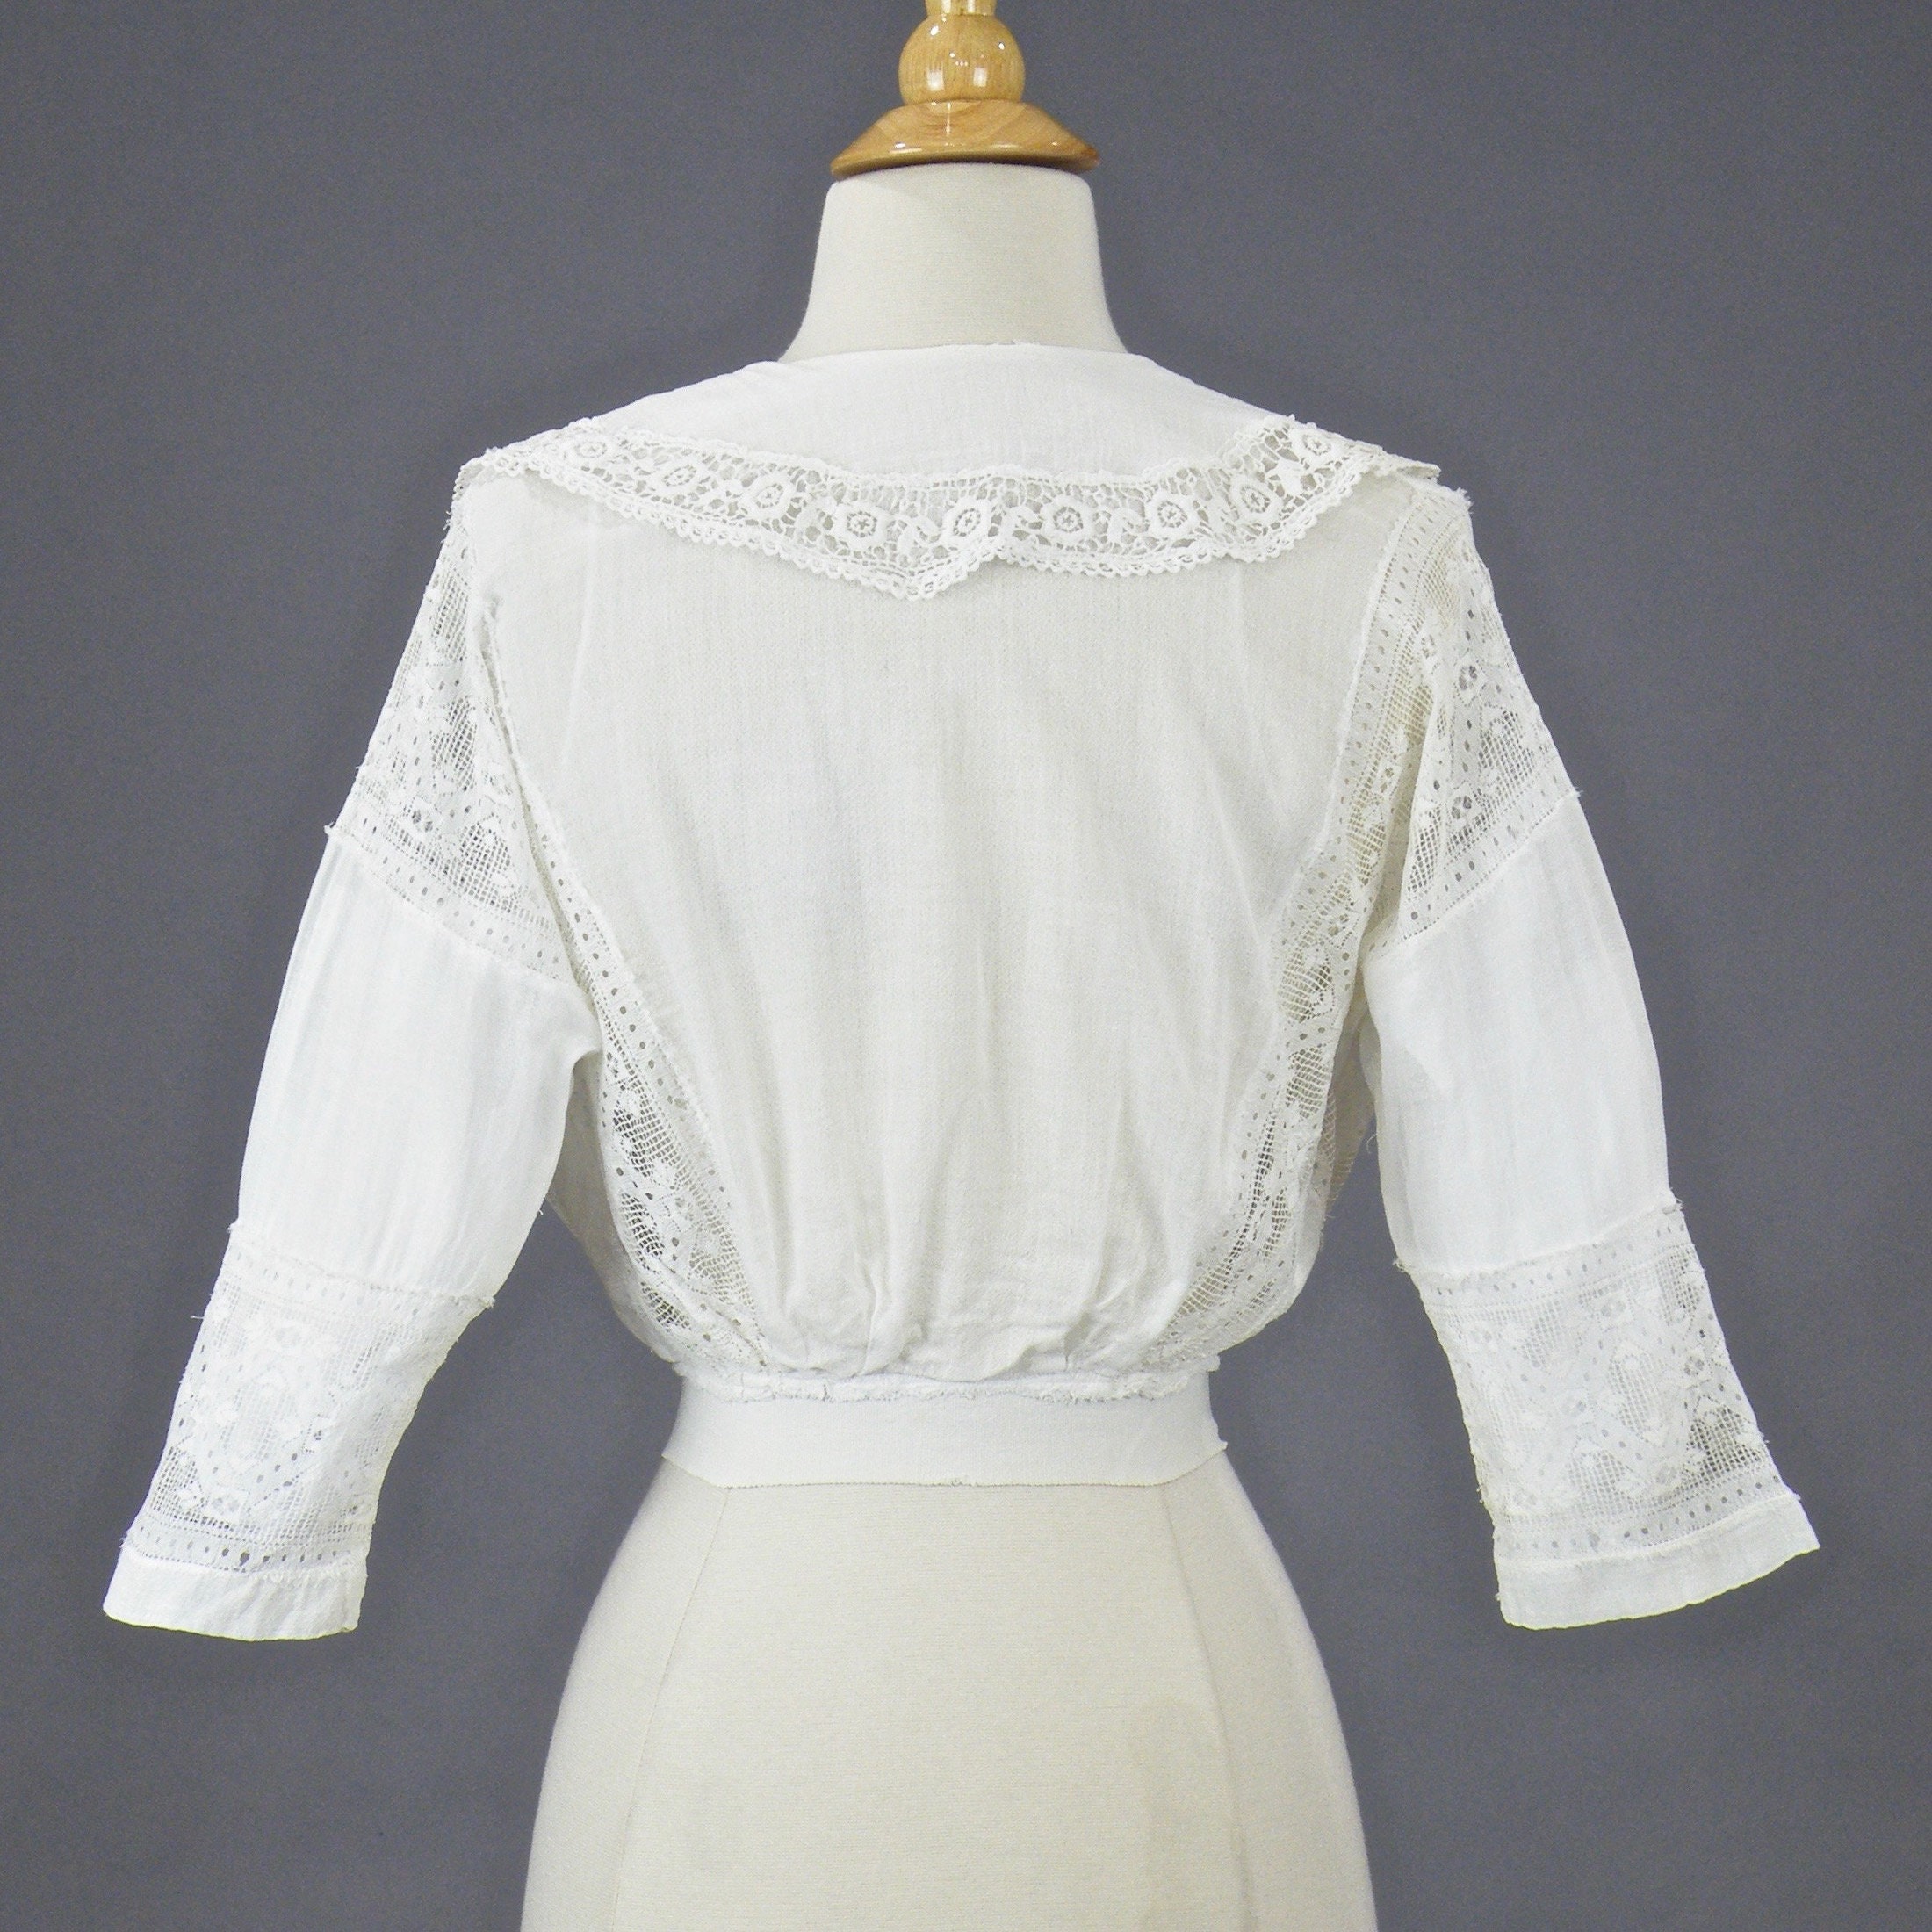 HOLD Edwardian Blouse, Antique 1900s Blouse, Embroidered White Cotton ...